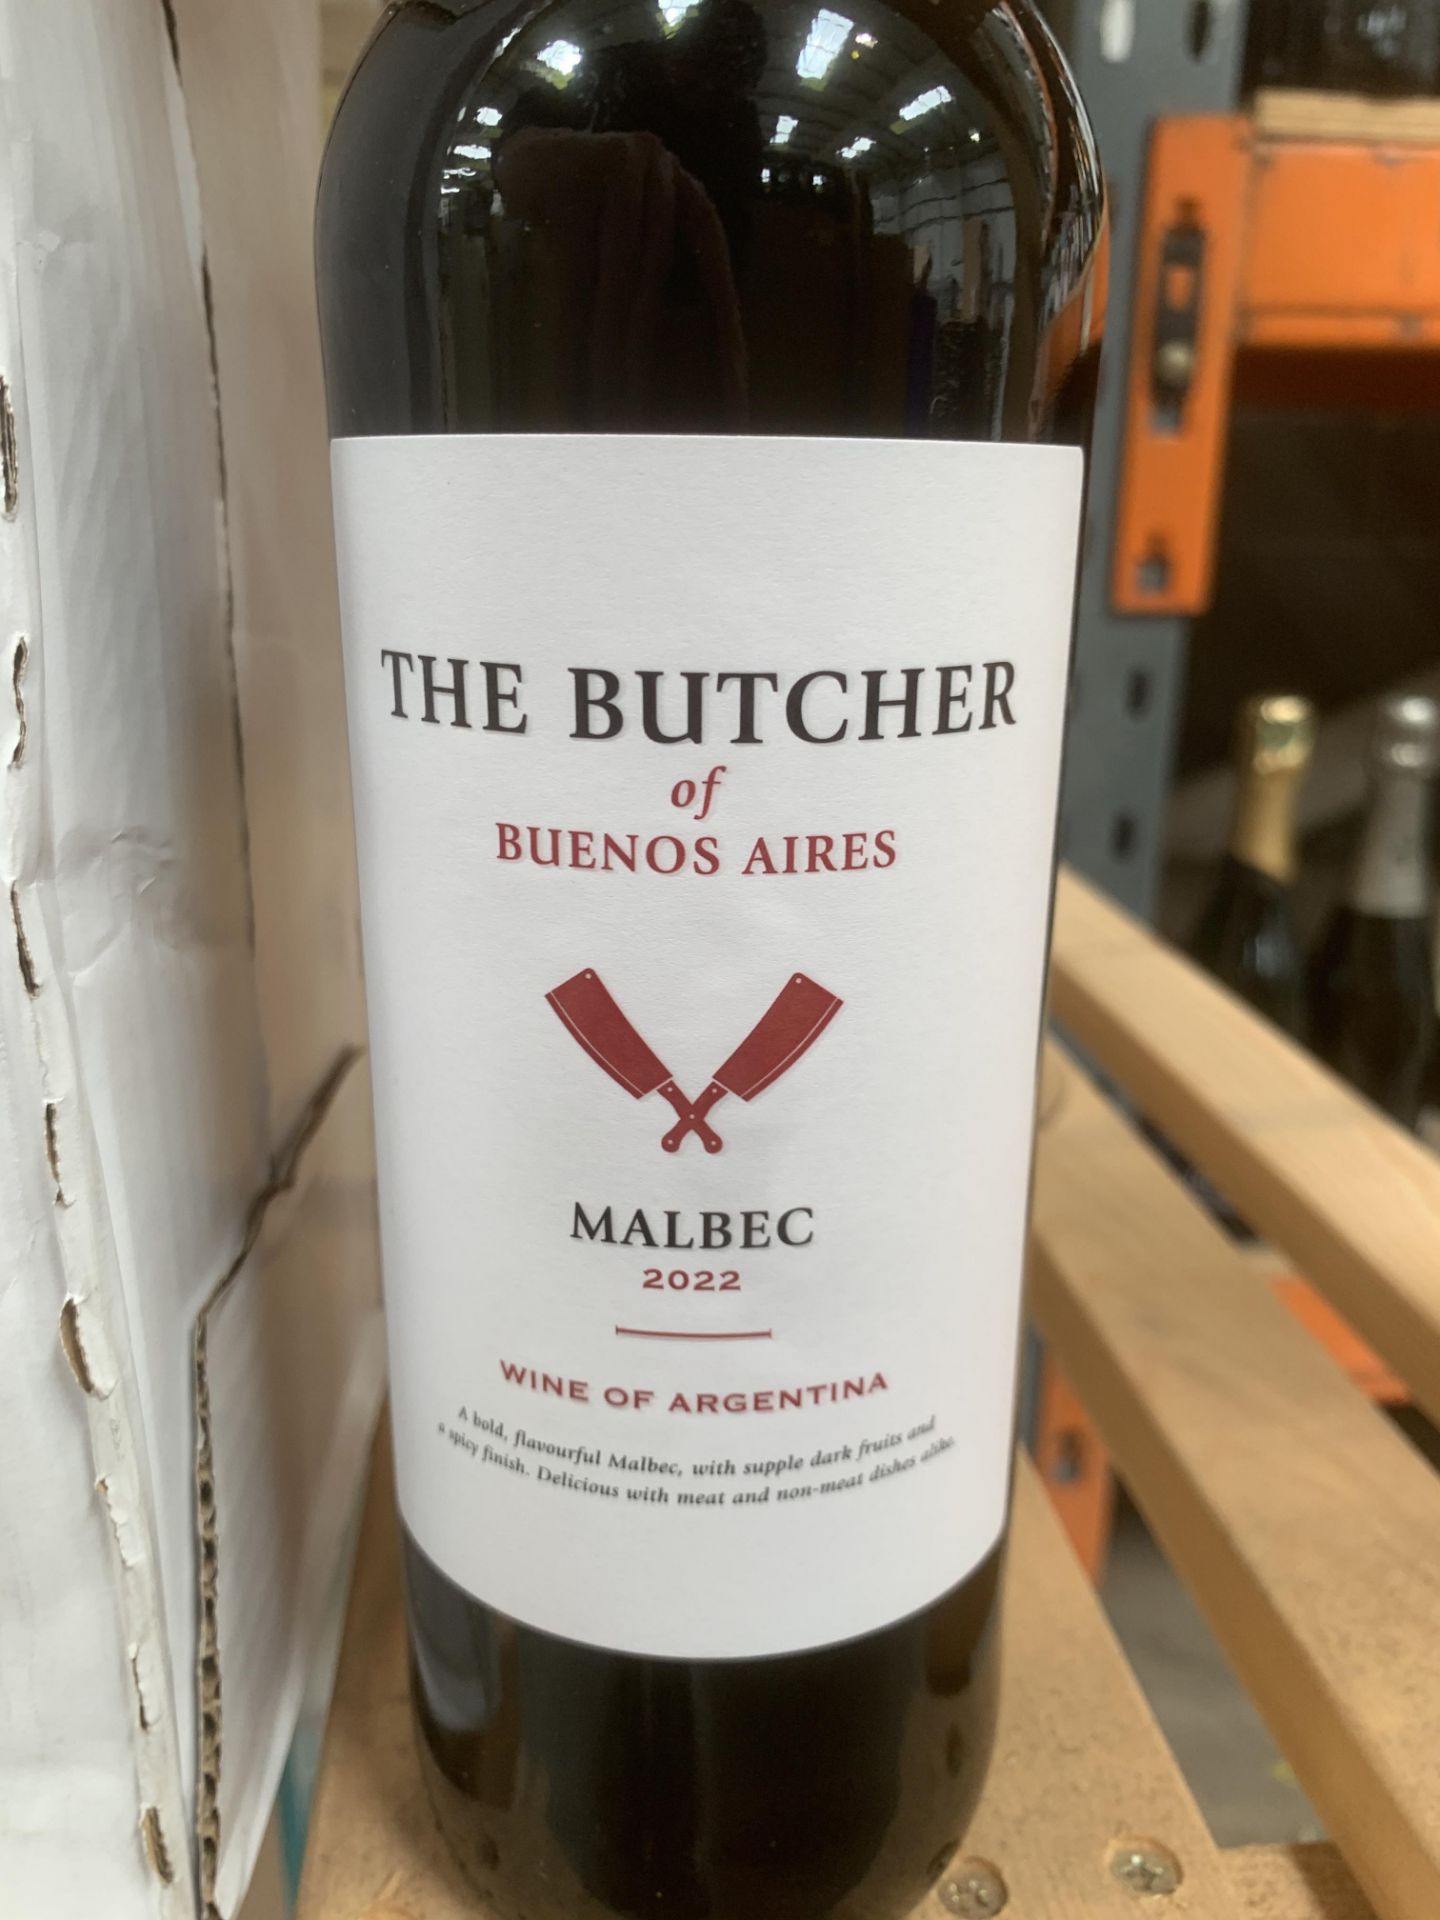 6x Bottles of The Butcher of Buenos Aires 2022 Malbec - Image 2 of 3